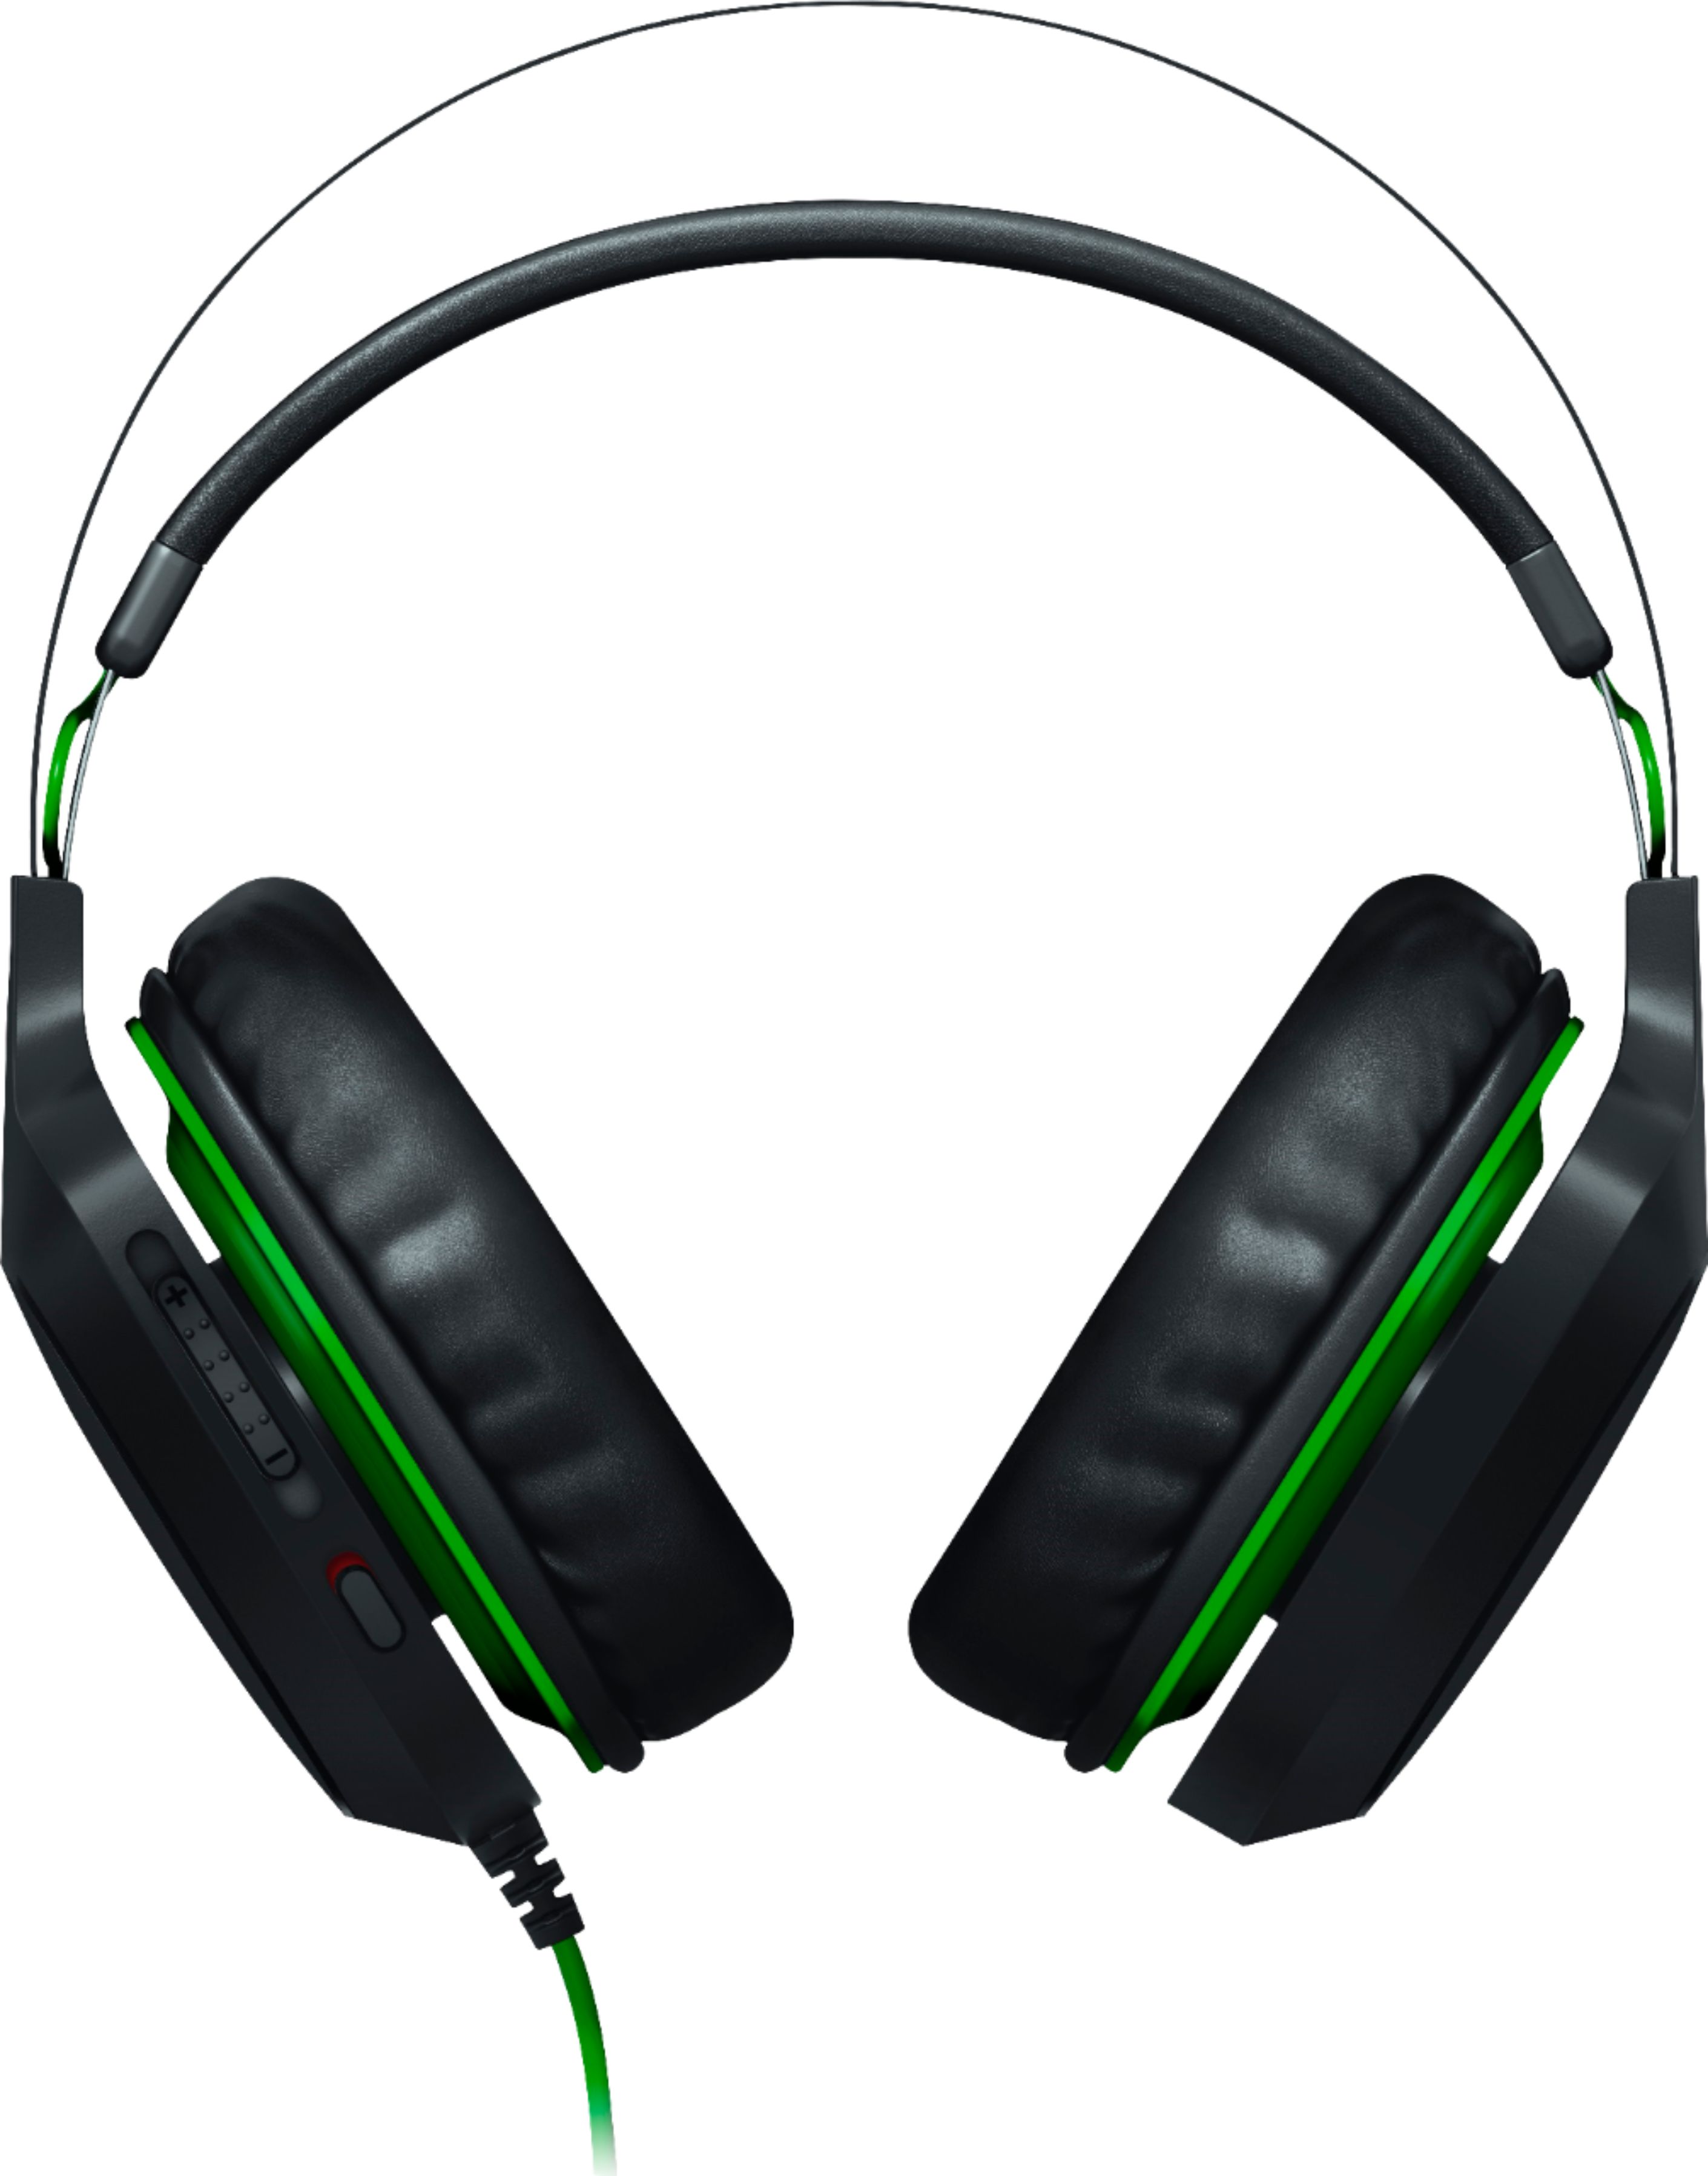 ding Wat is er mis Psychologisch Best Buy: Razer Electra V2 Wired 7.1 Gaming Headset for PC, Mac, PS4, Xbox  One, Nintendo Switch, Mobile Devices Black RZ04-02210100-R3U1